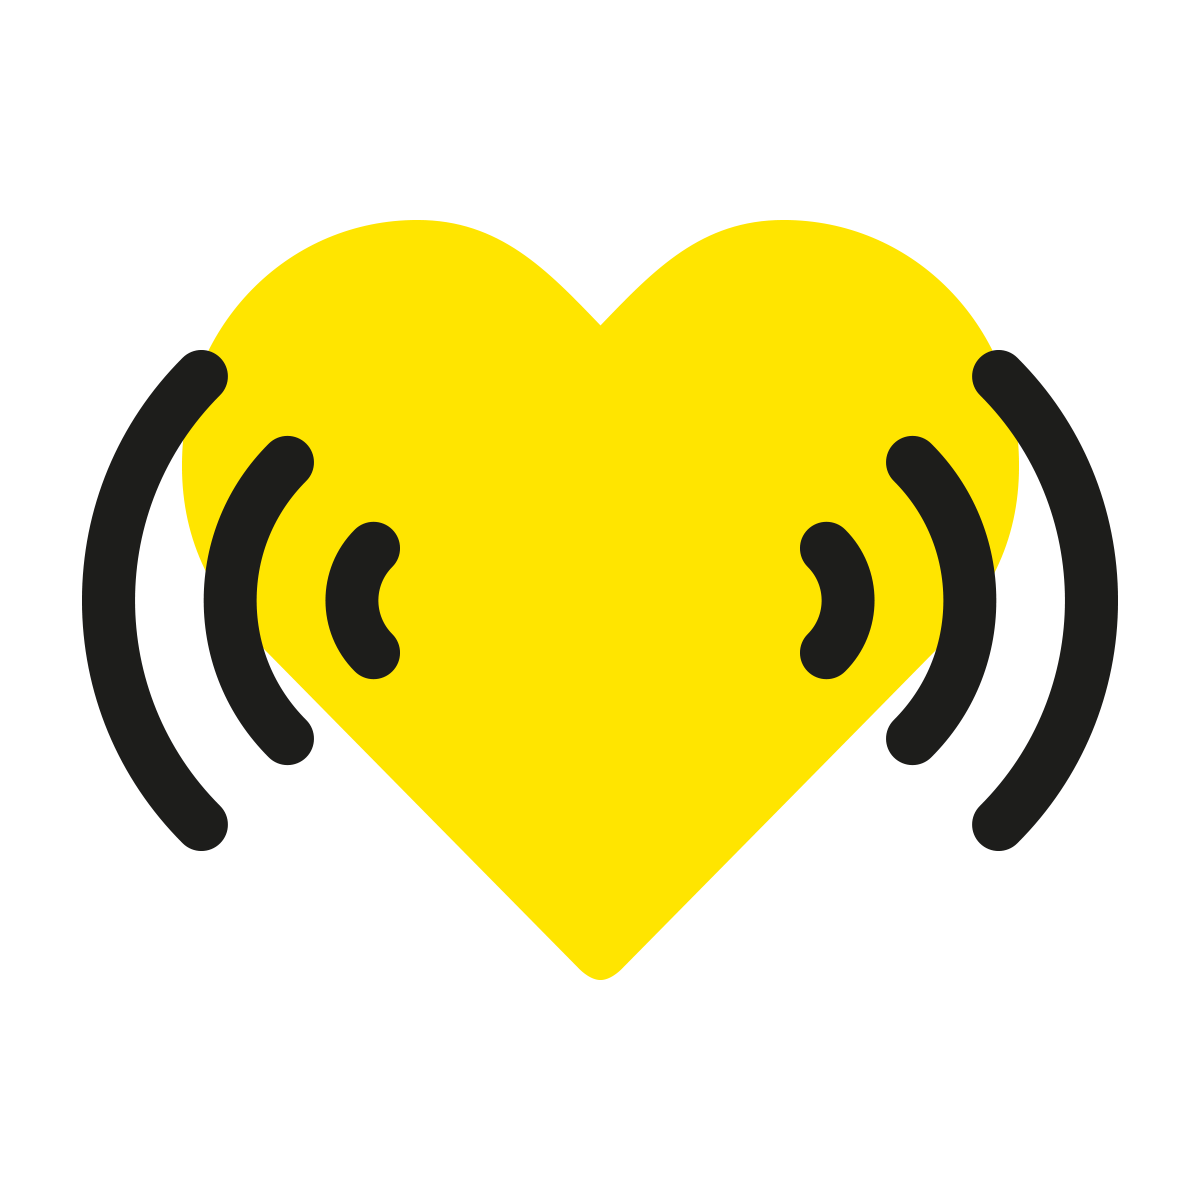 Logo for the sound of BVG. The yellow heart in the middle and right and left curved lines.